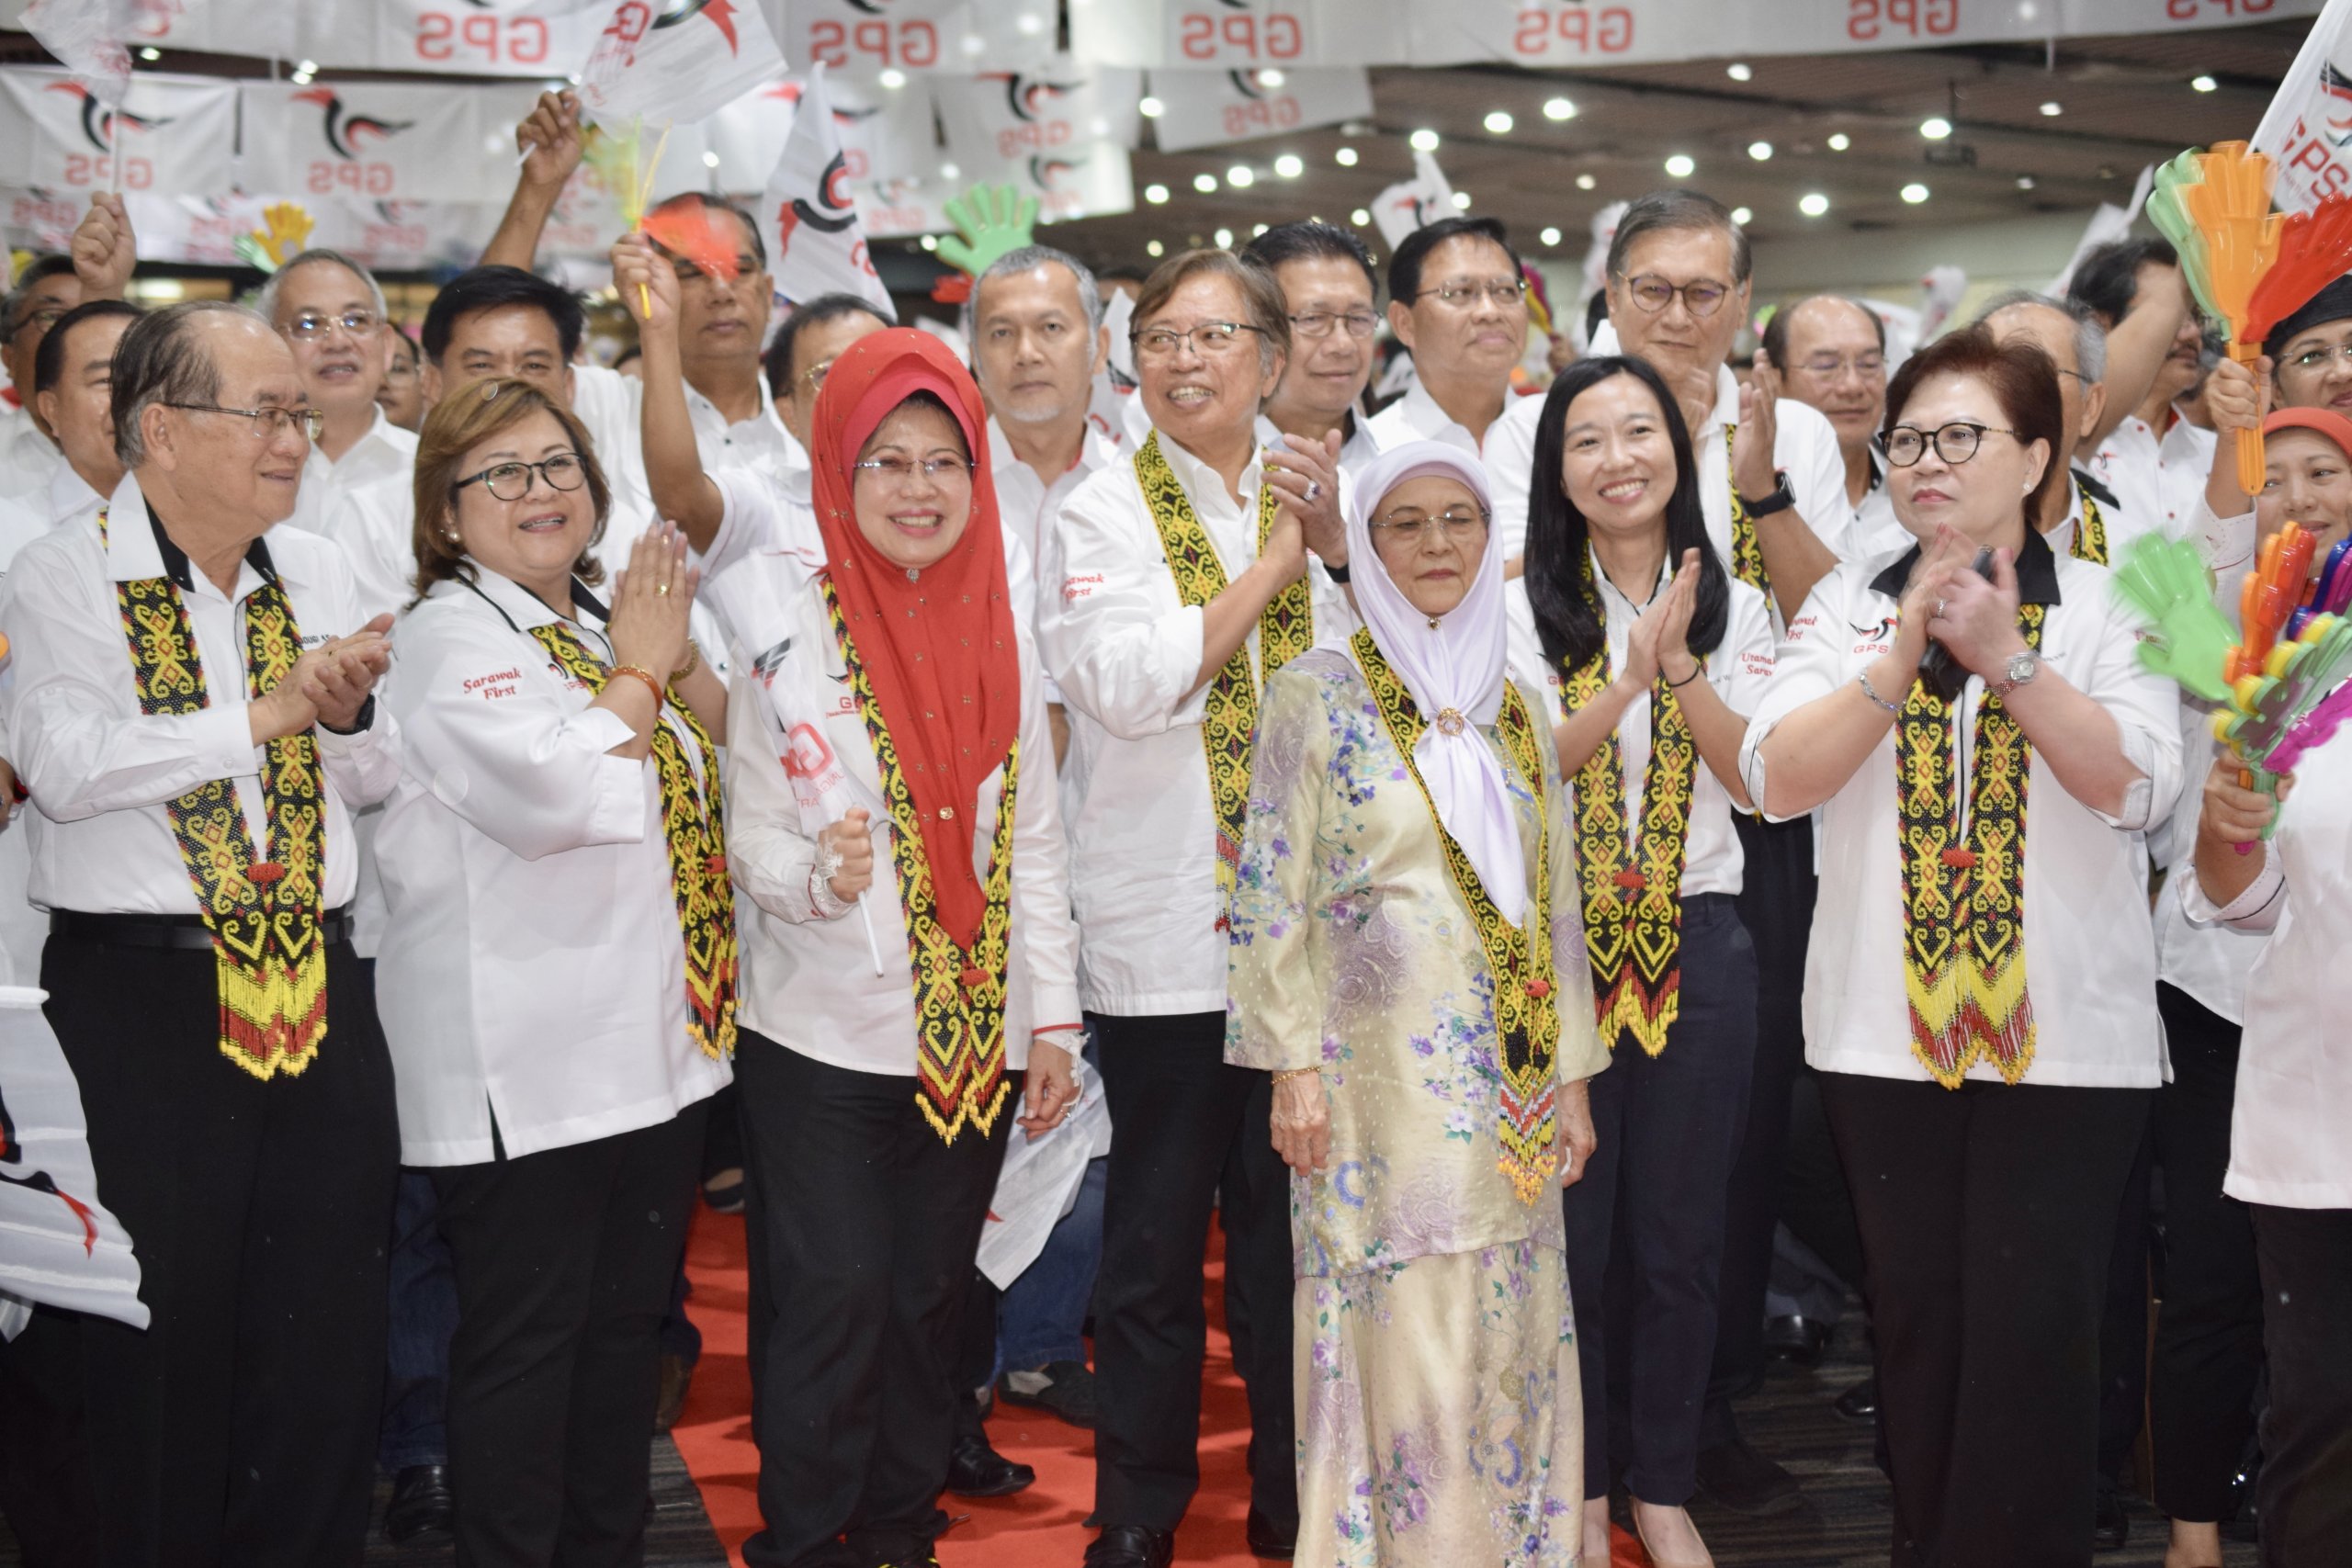 Abg Jo: Possible for woman to become Sarawak Premier one day